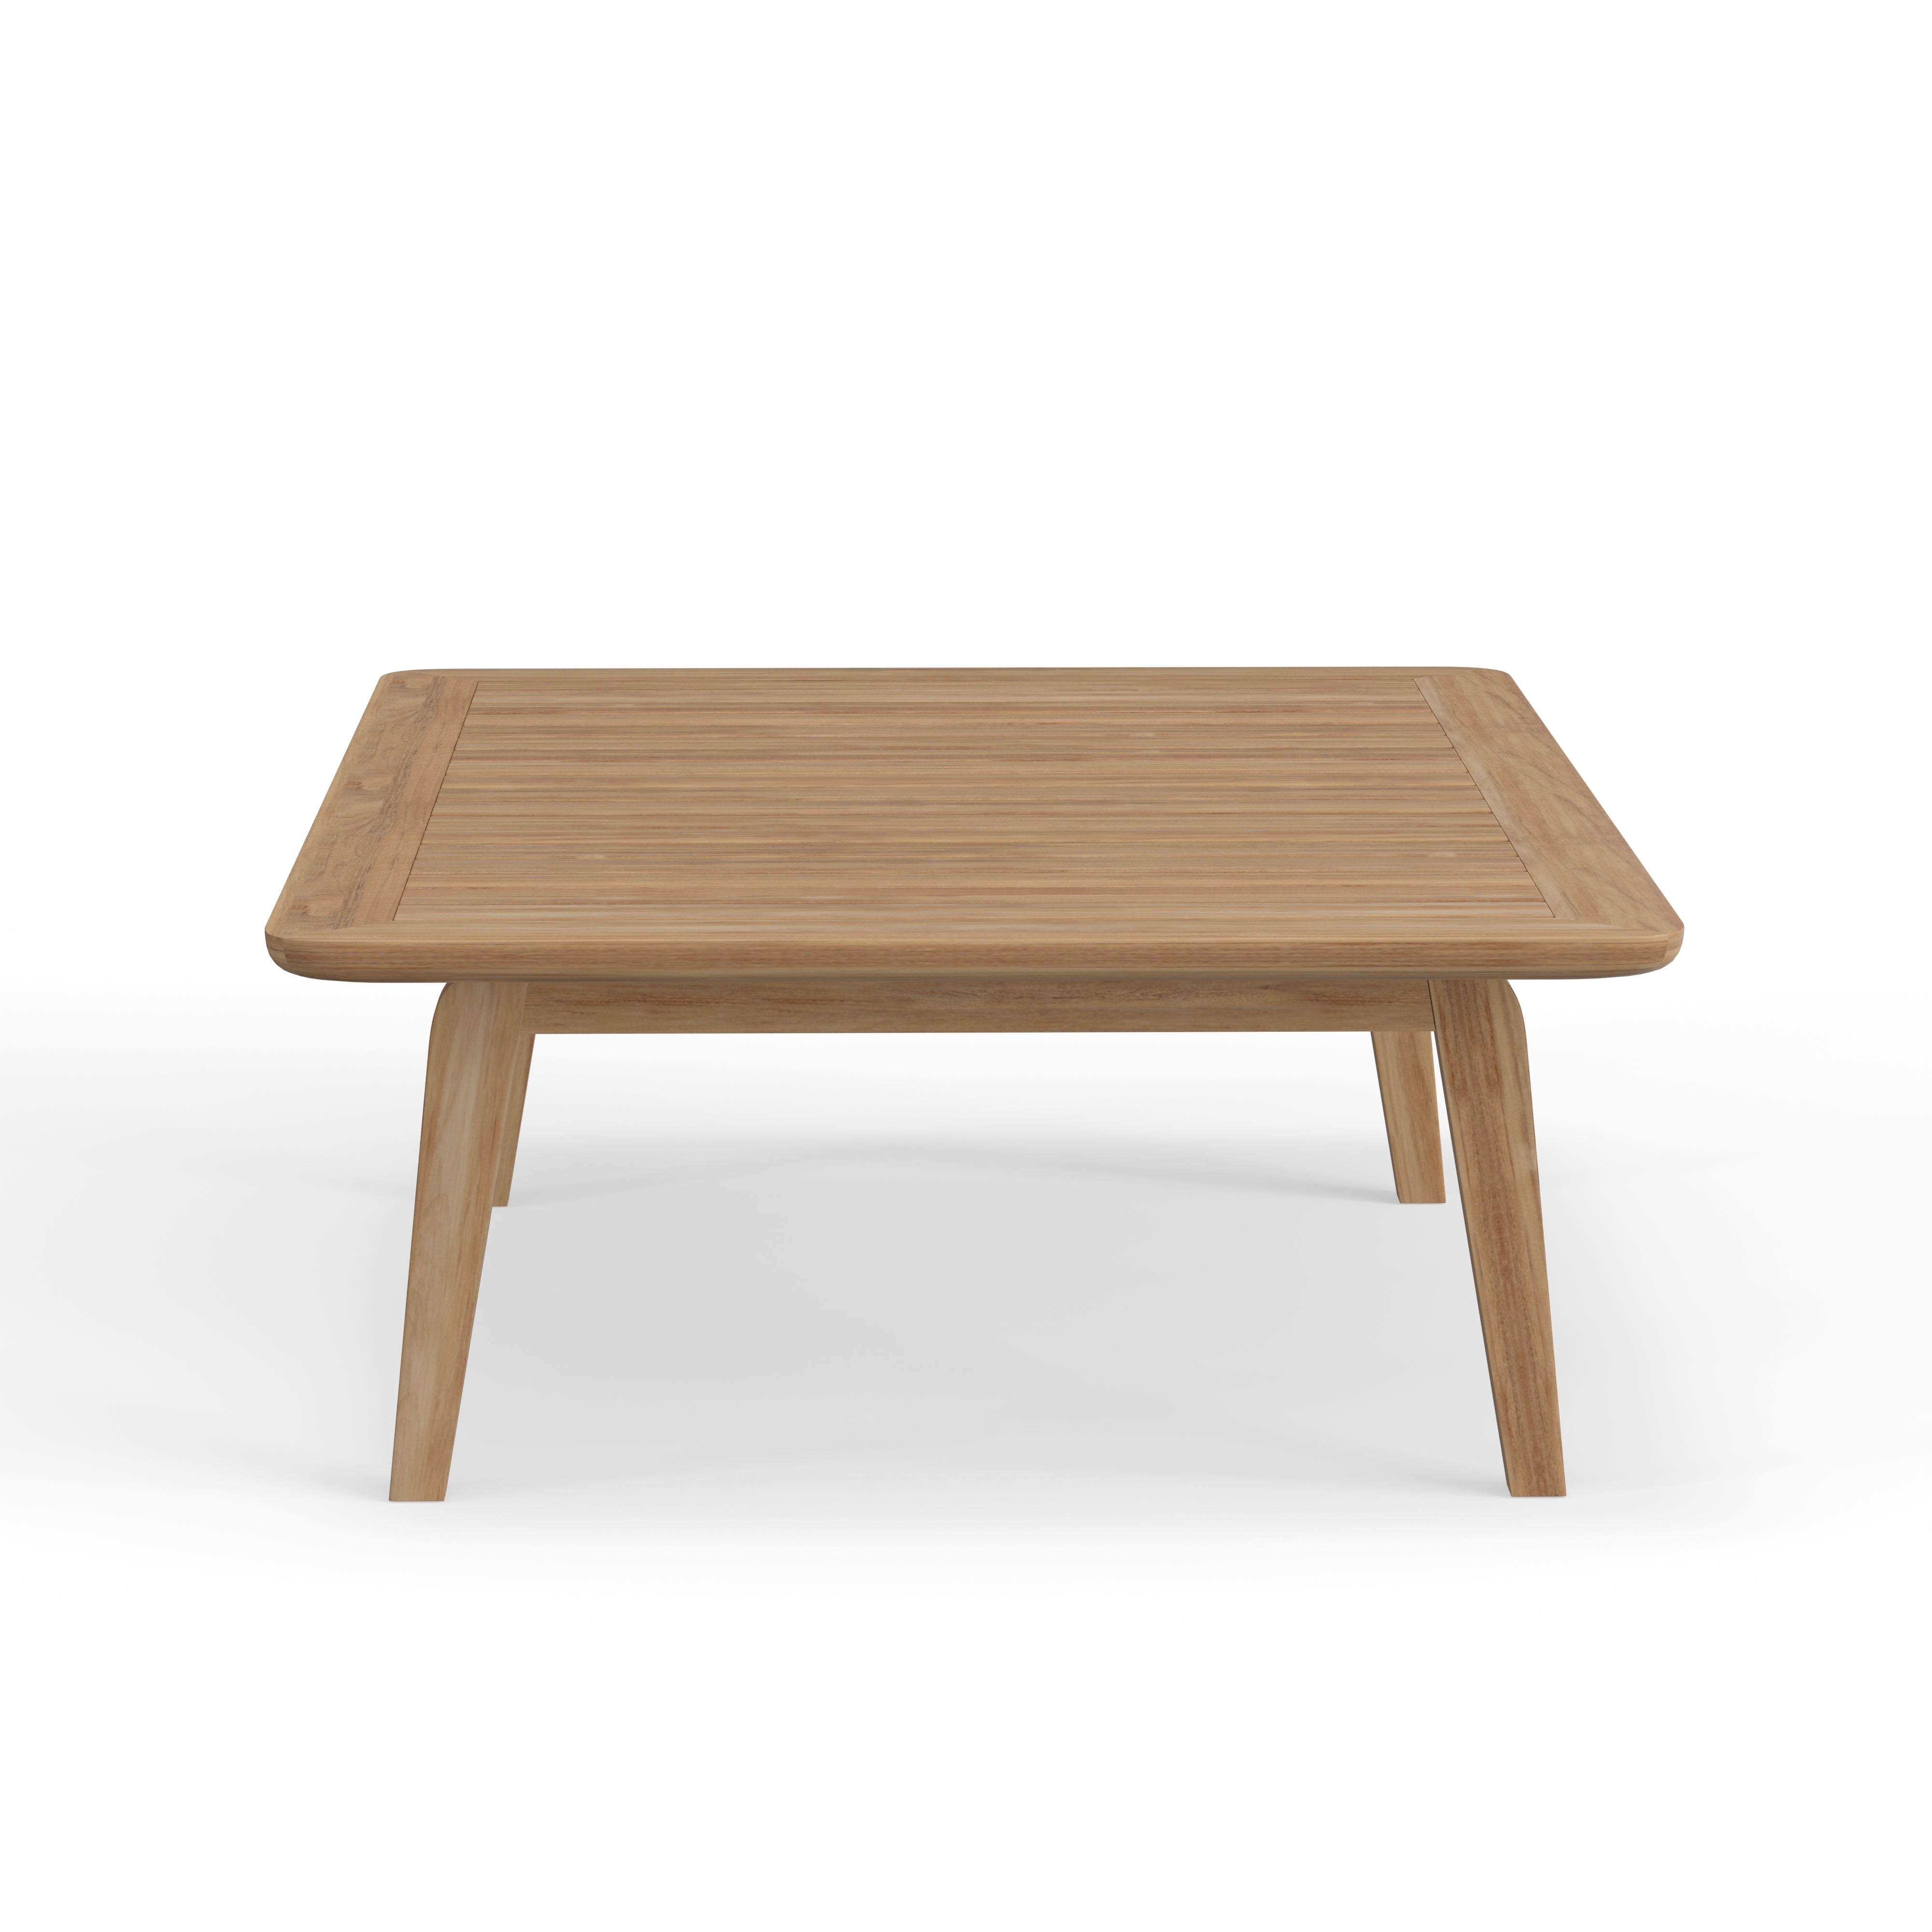 Modern Coffee Table Made From Teak For OutsideHandcrafted From The Best Grade A Teak, This Modern Coffee Table Goes With Anything!